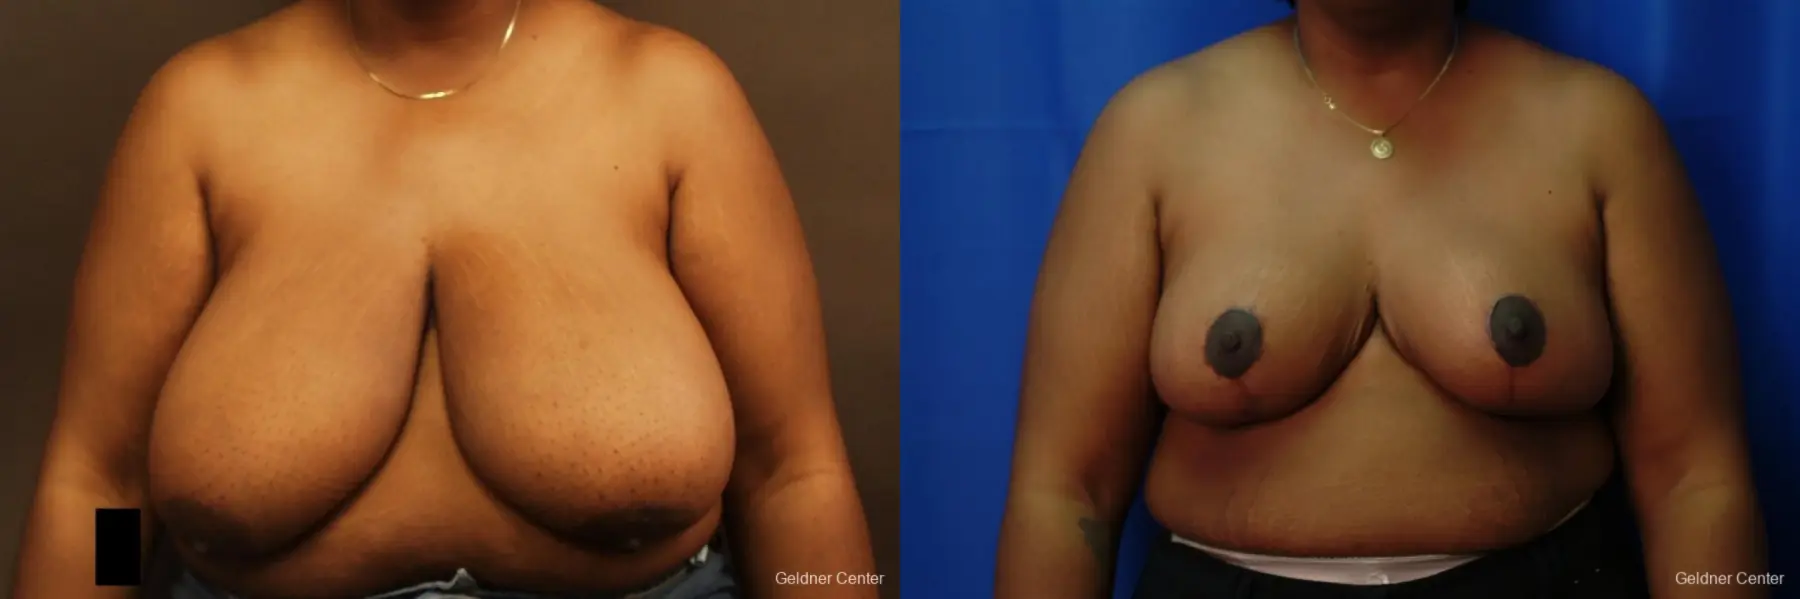 Chicago Breast Reduction 2406 - Before and After